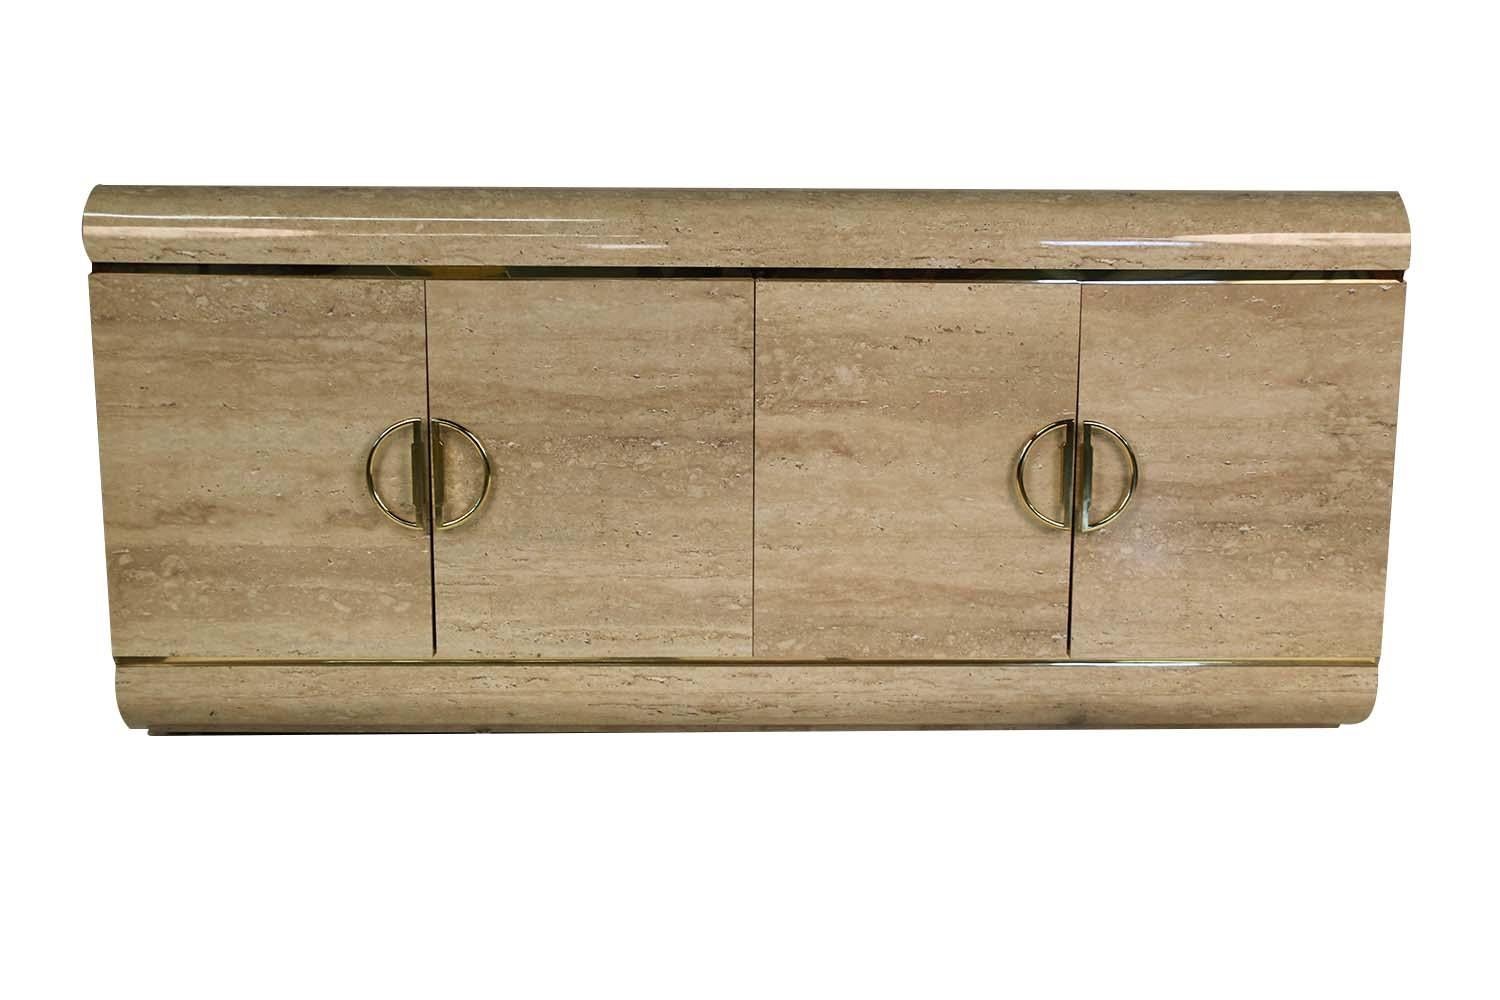 A lovely modernist custom credenza / cabinet circa 1980's, with Classic modern design reminiscent of J. Wade Beam. This exquisite piece features a beautiful faux travertine, laminate, finish with a simple waterfall edge, and modern profile, accented